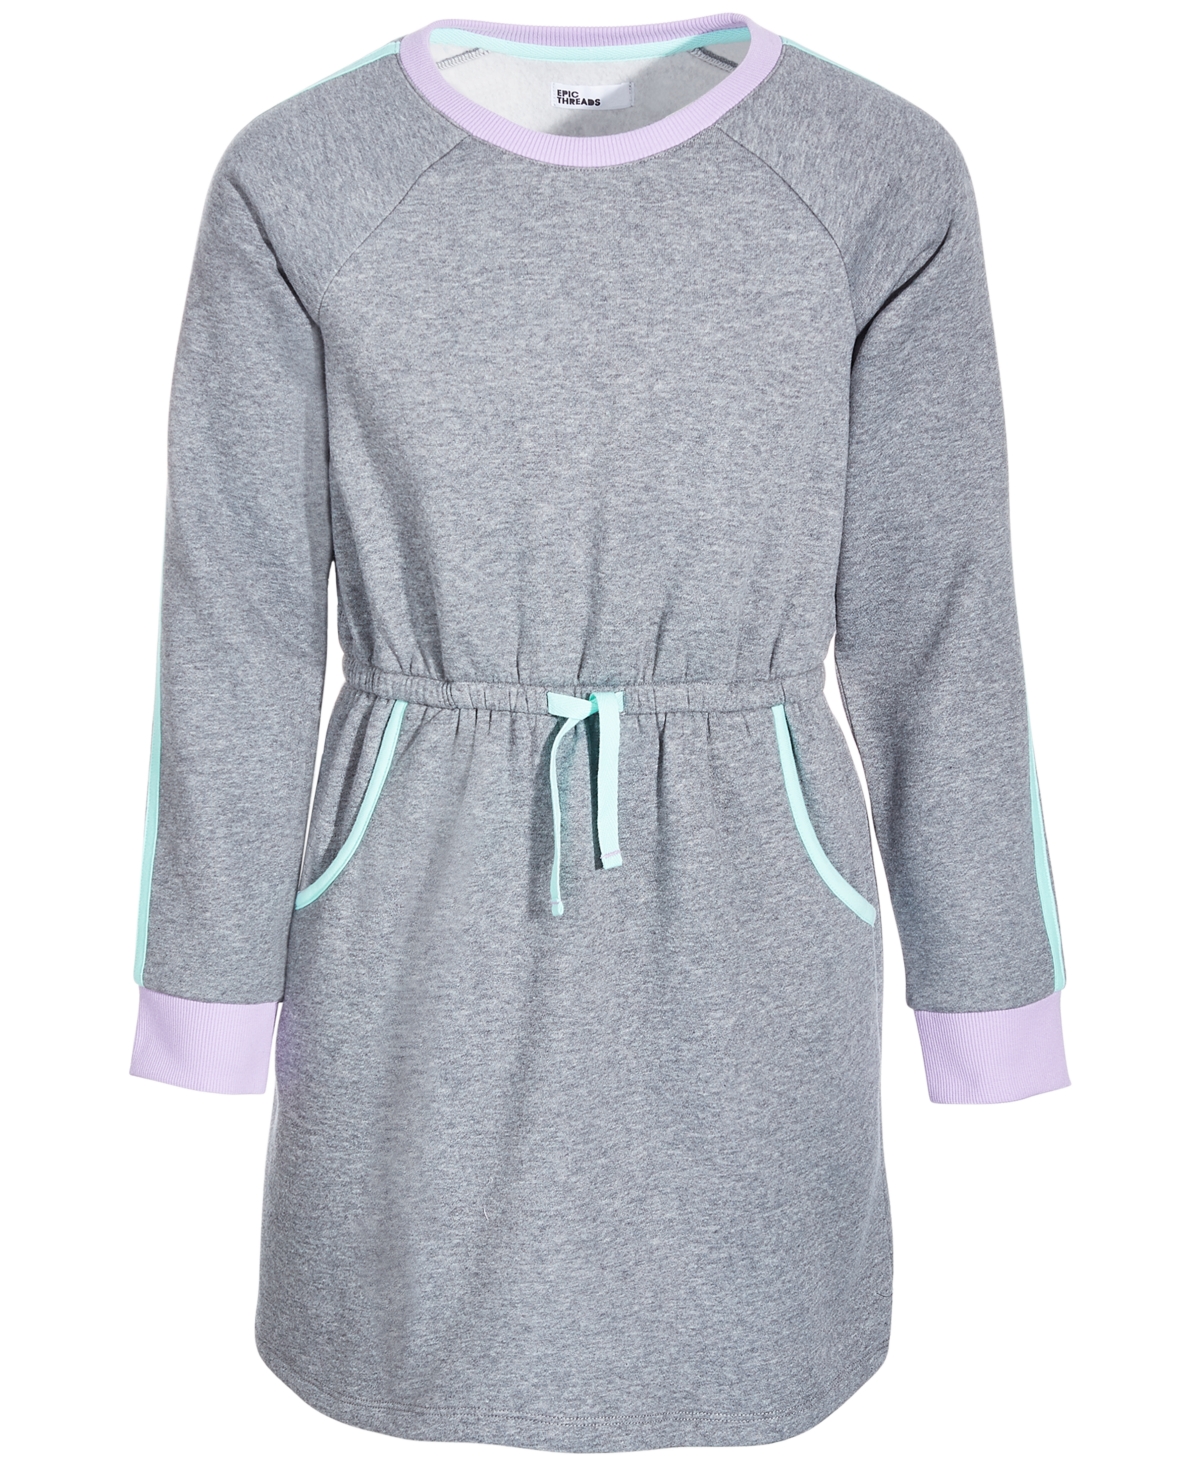 Epic Threads Kids' Big Girls Color-trim Sweatshirt Dress, Created For Macy's In Pewter Heather